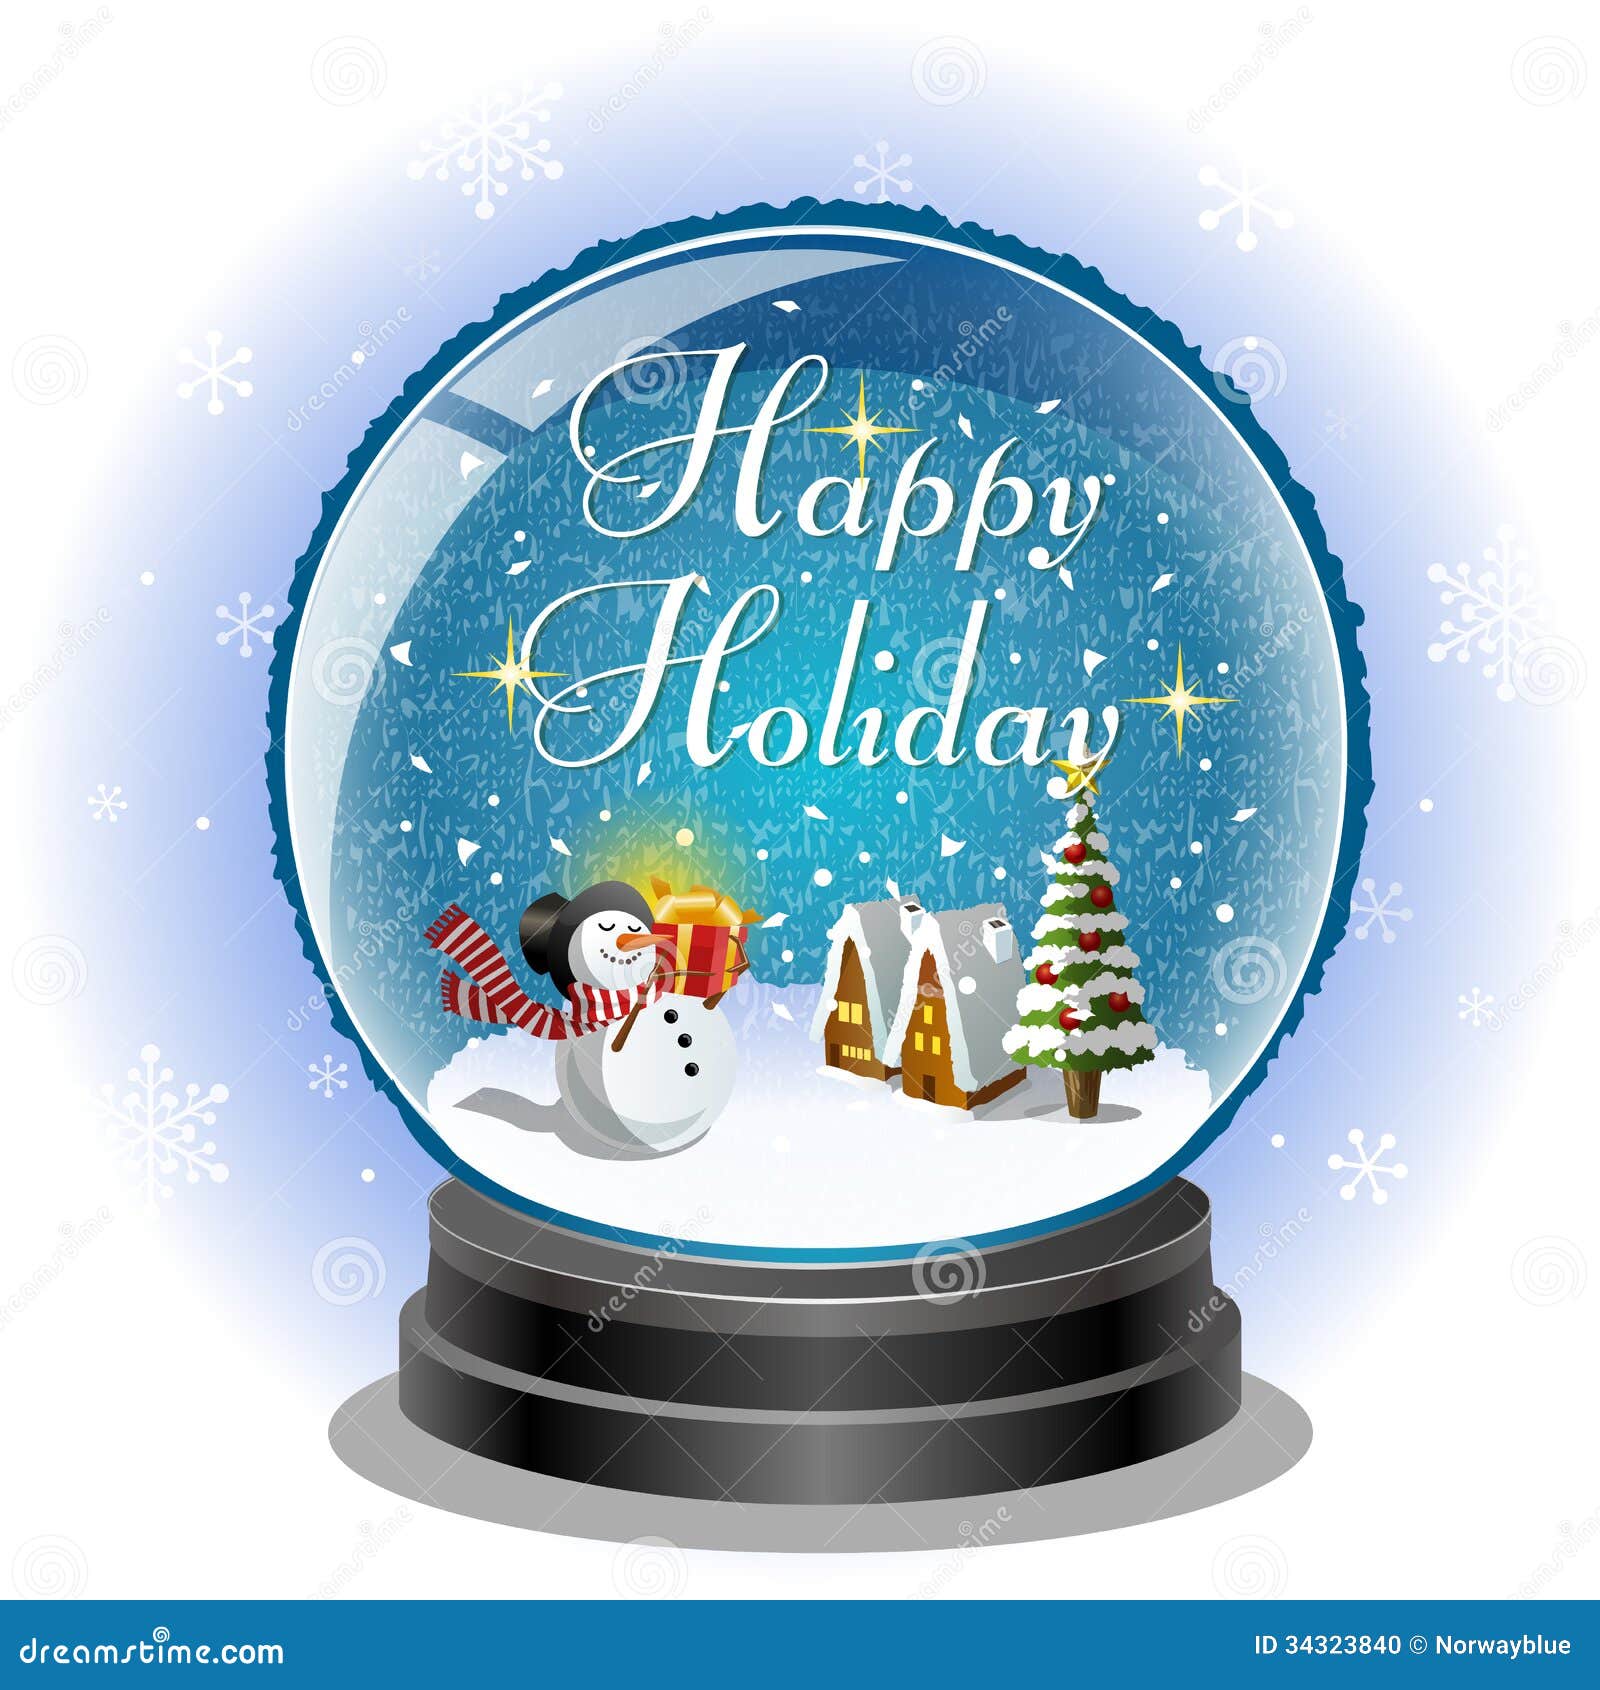 Snowman Holding A Gift Box In Snow Globe Stock Photo 